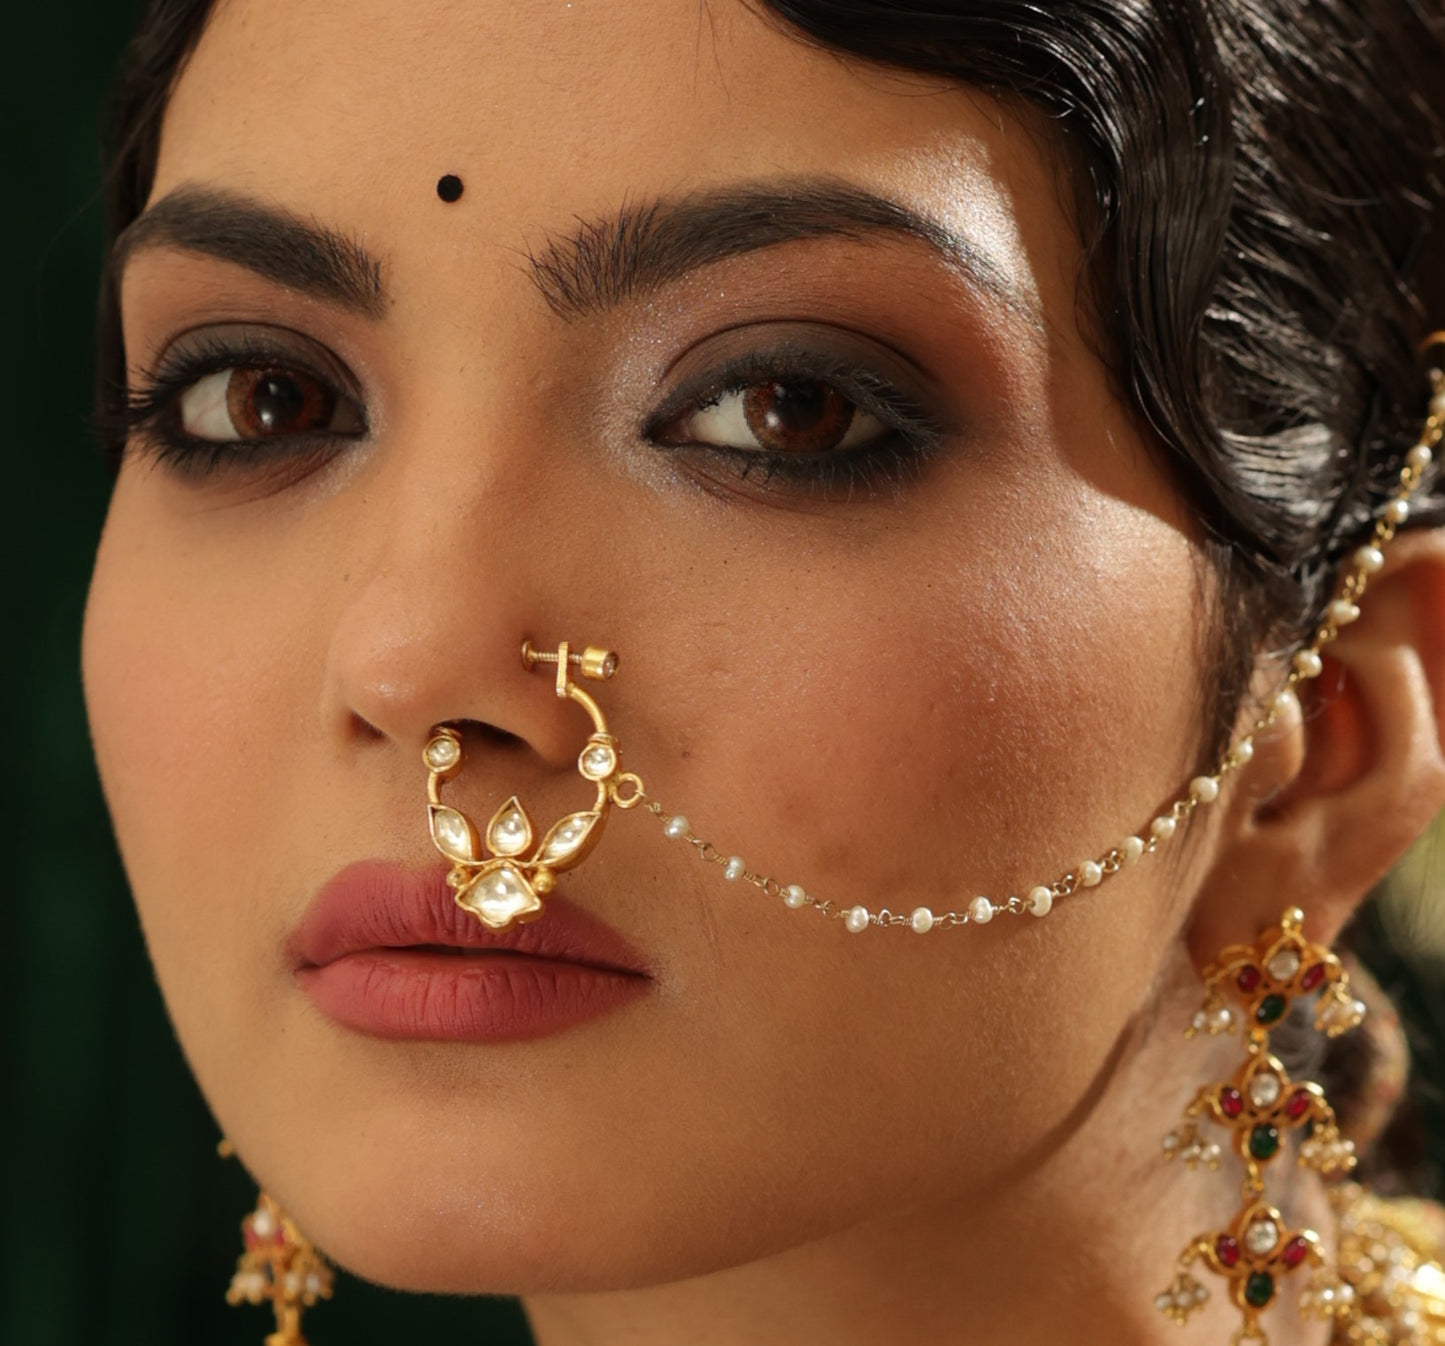 NITHA CRYSTAL STONE GOLD PLATED SILVER,
NOSE RING